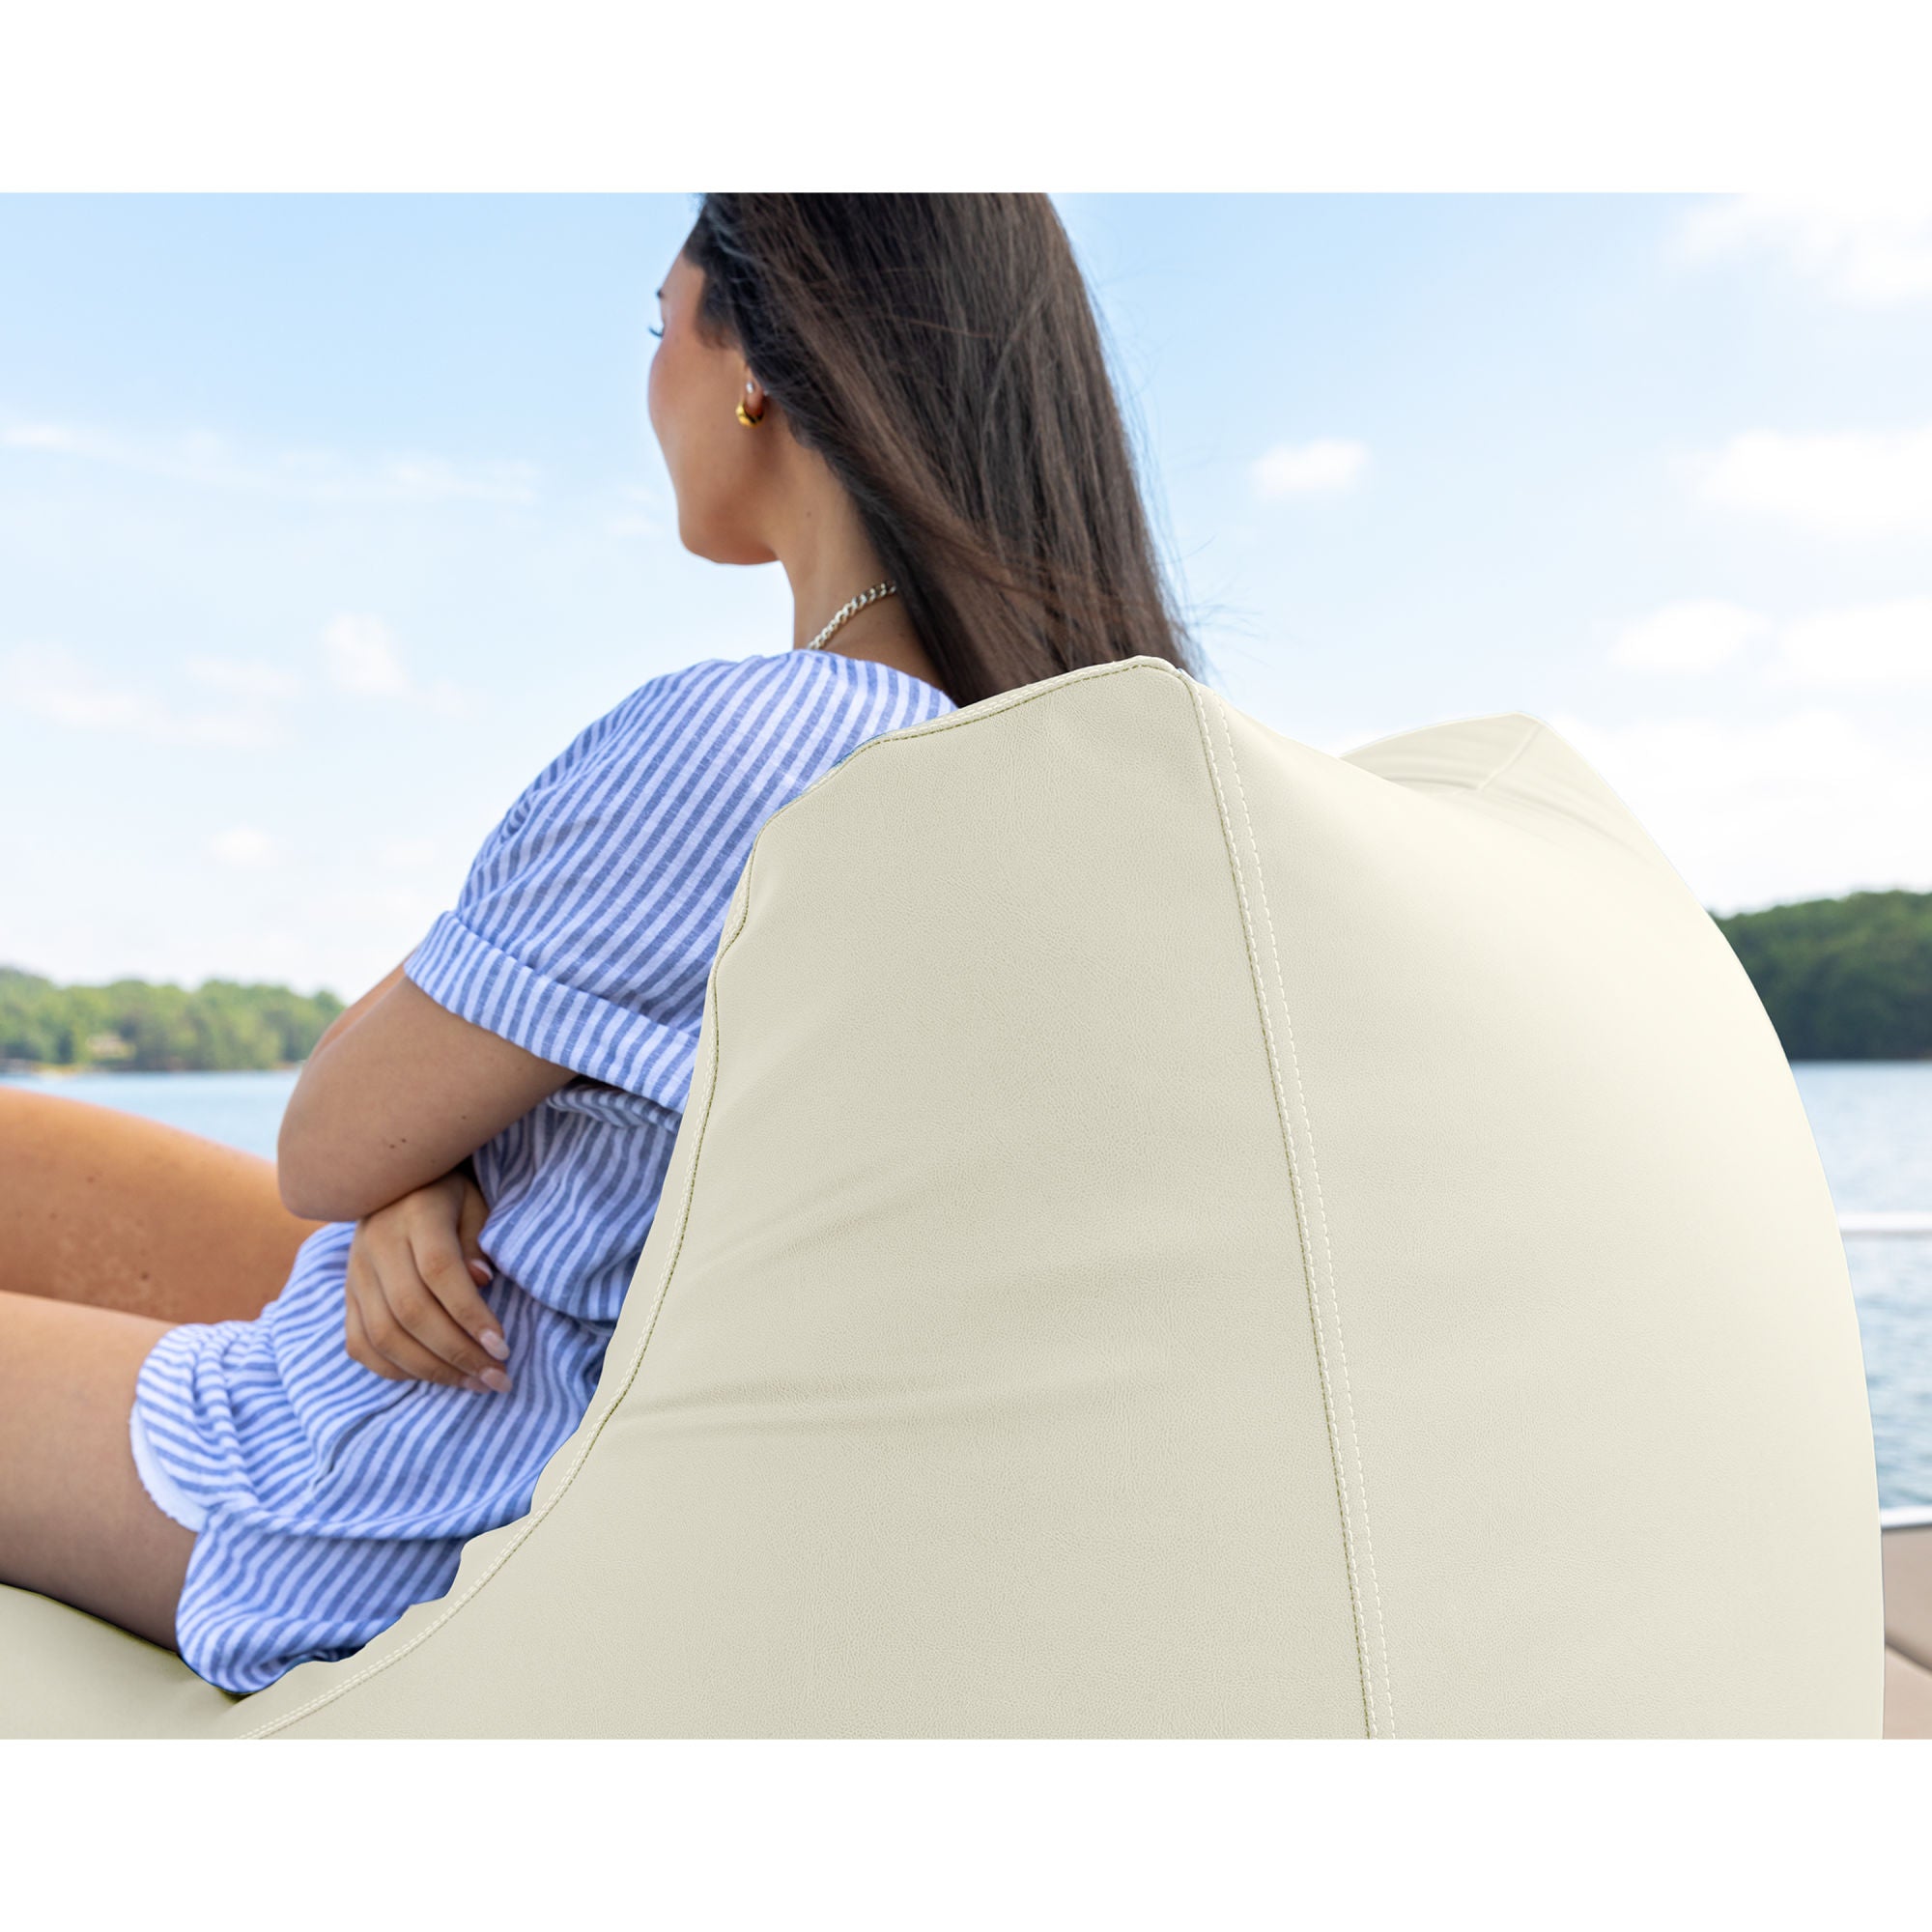 Jaxx Ponce Nautical Edition - Bean Bag Chair for Boat, Yacht & Watersports - Marine Vinyl, White